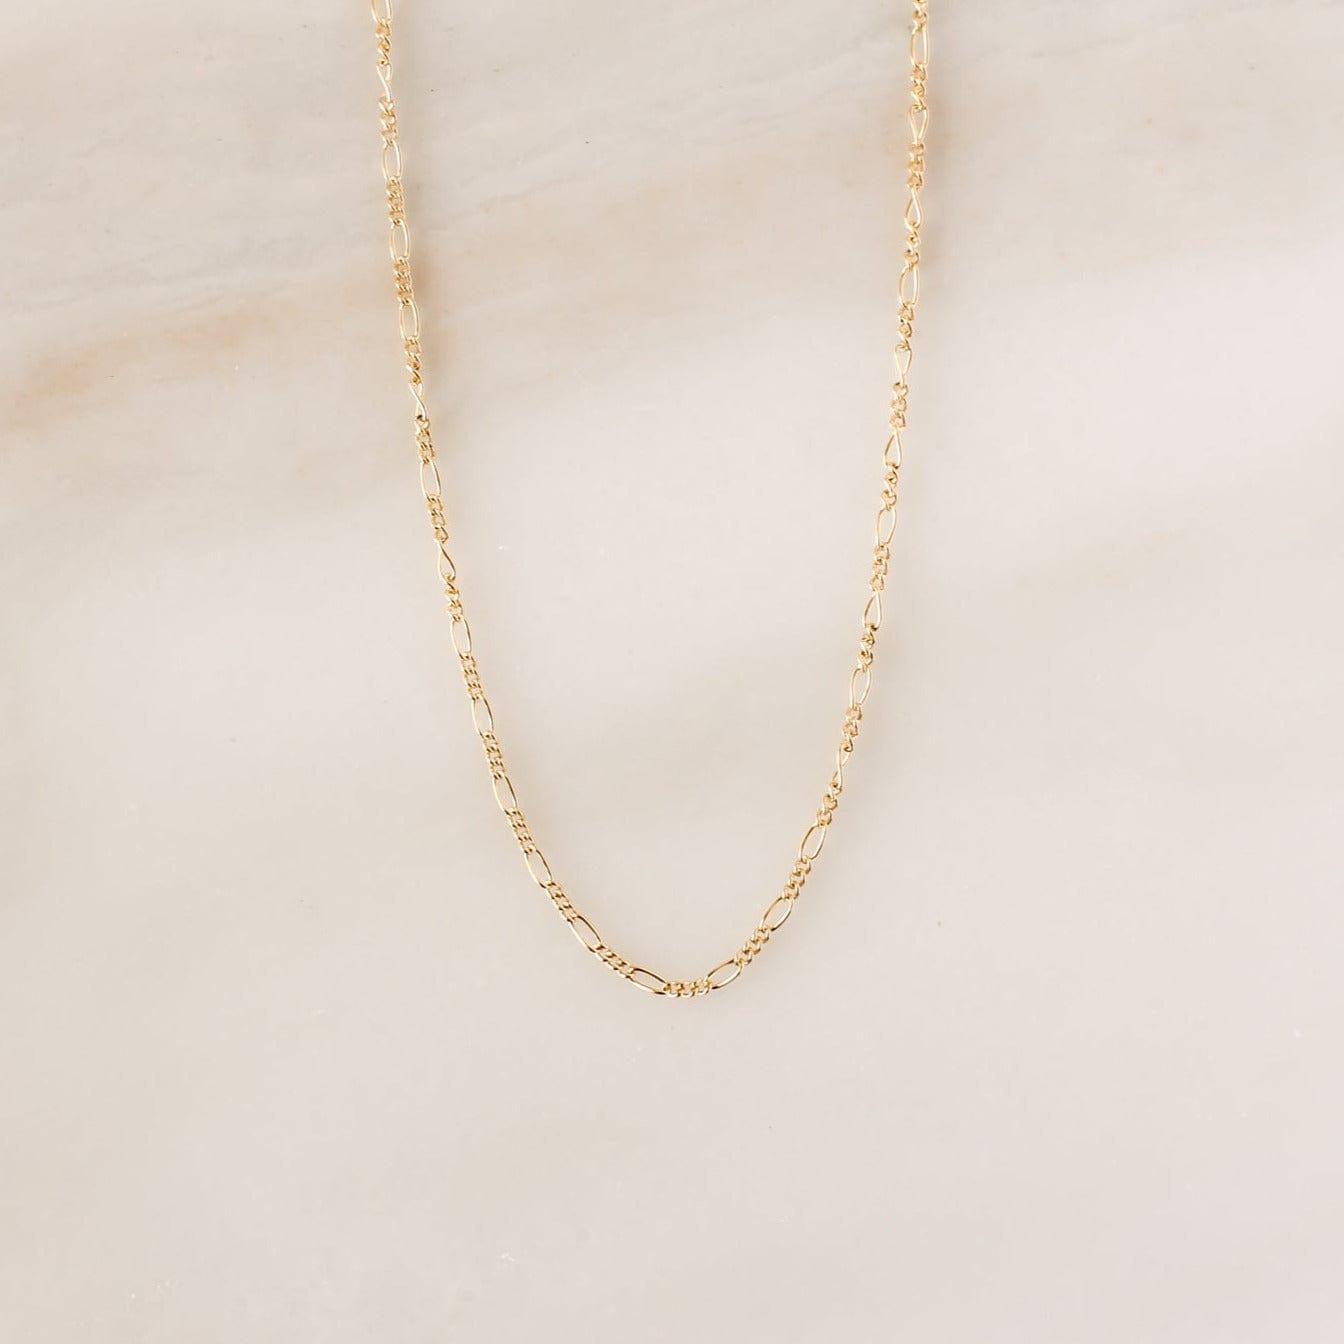 Figaro Chain Necklace - Nolia Jewelry - Meaningful + Sustainably Handcrafted Jewelry